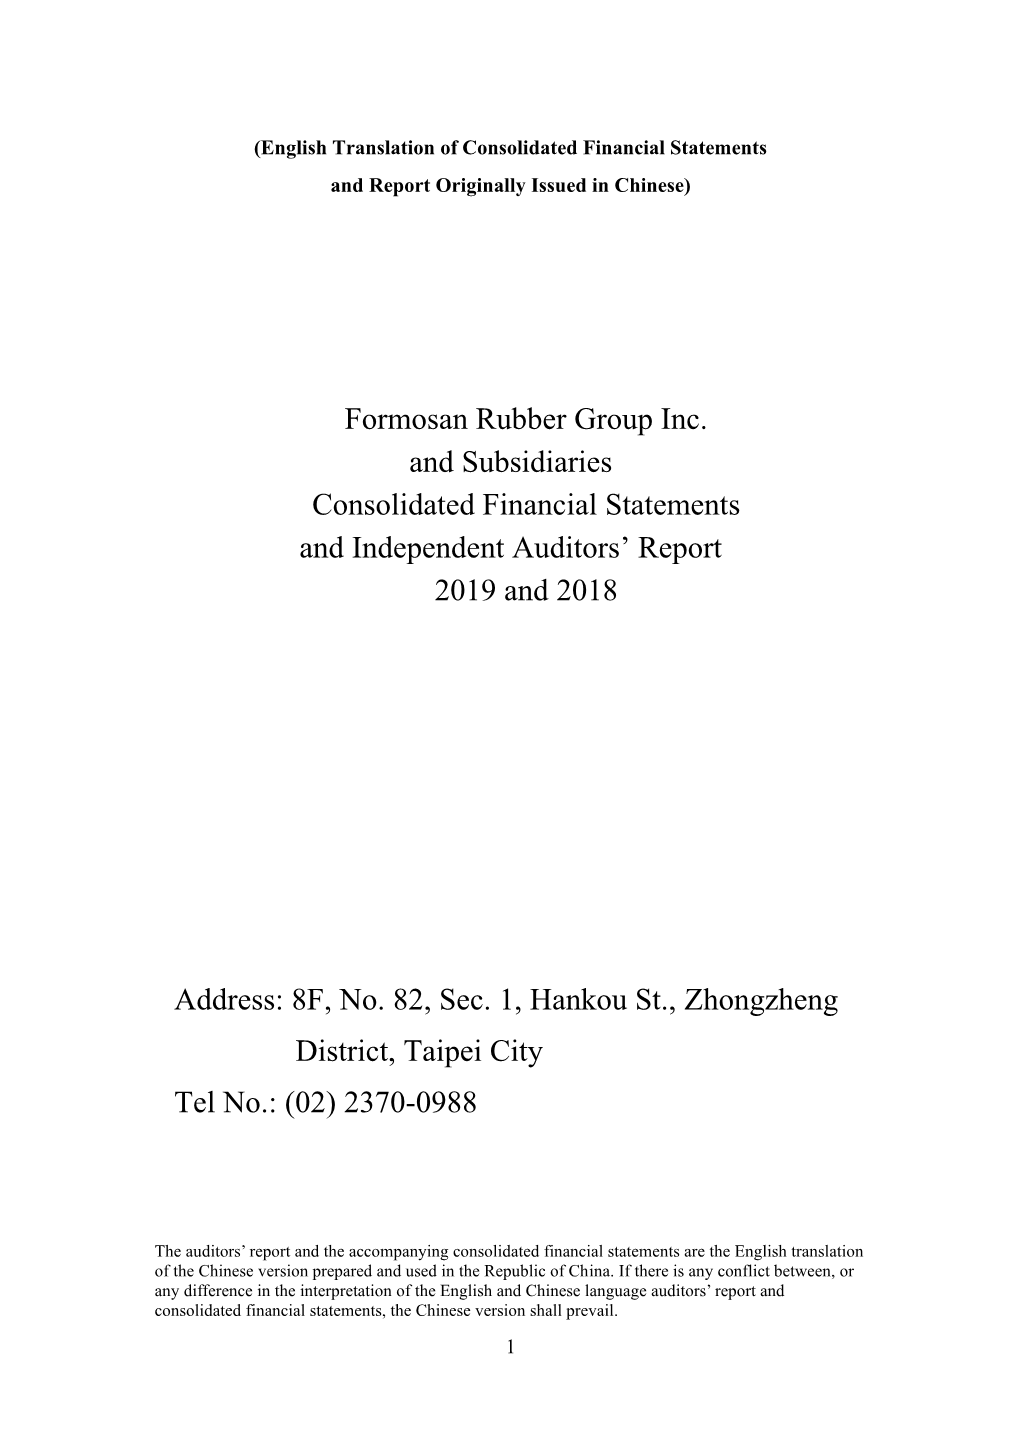 Formosan Rubber Group Inc. and Subsidiaries Consolidated Financial Statements and Independent Auditors’ Report 2019 and 2018